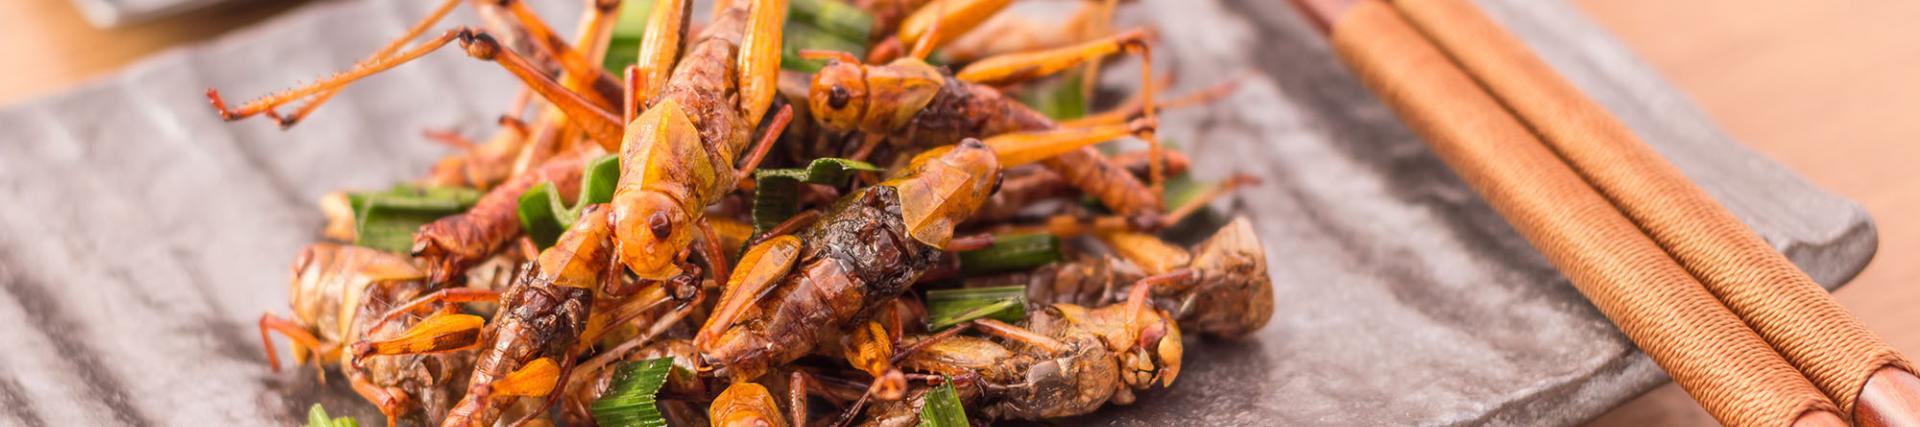 A small plate with a pile of insects on it, with chopsticks placed on the side